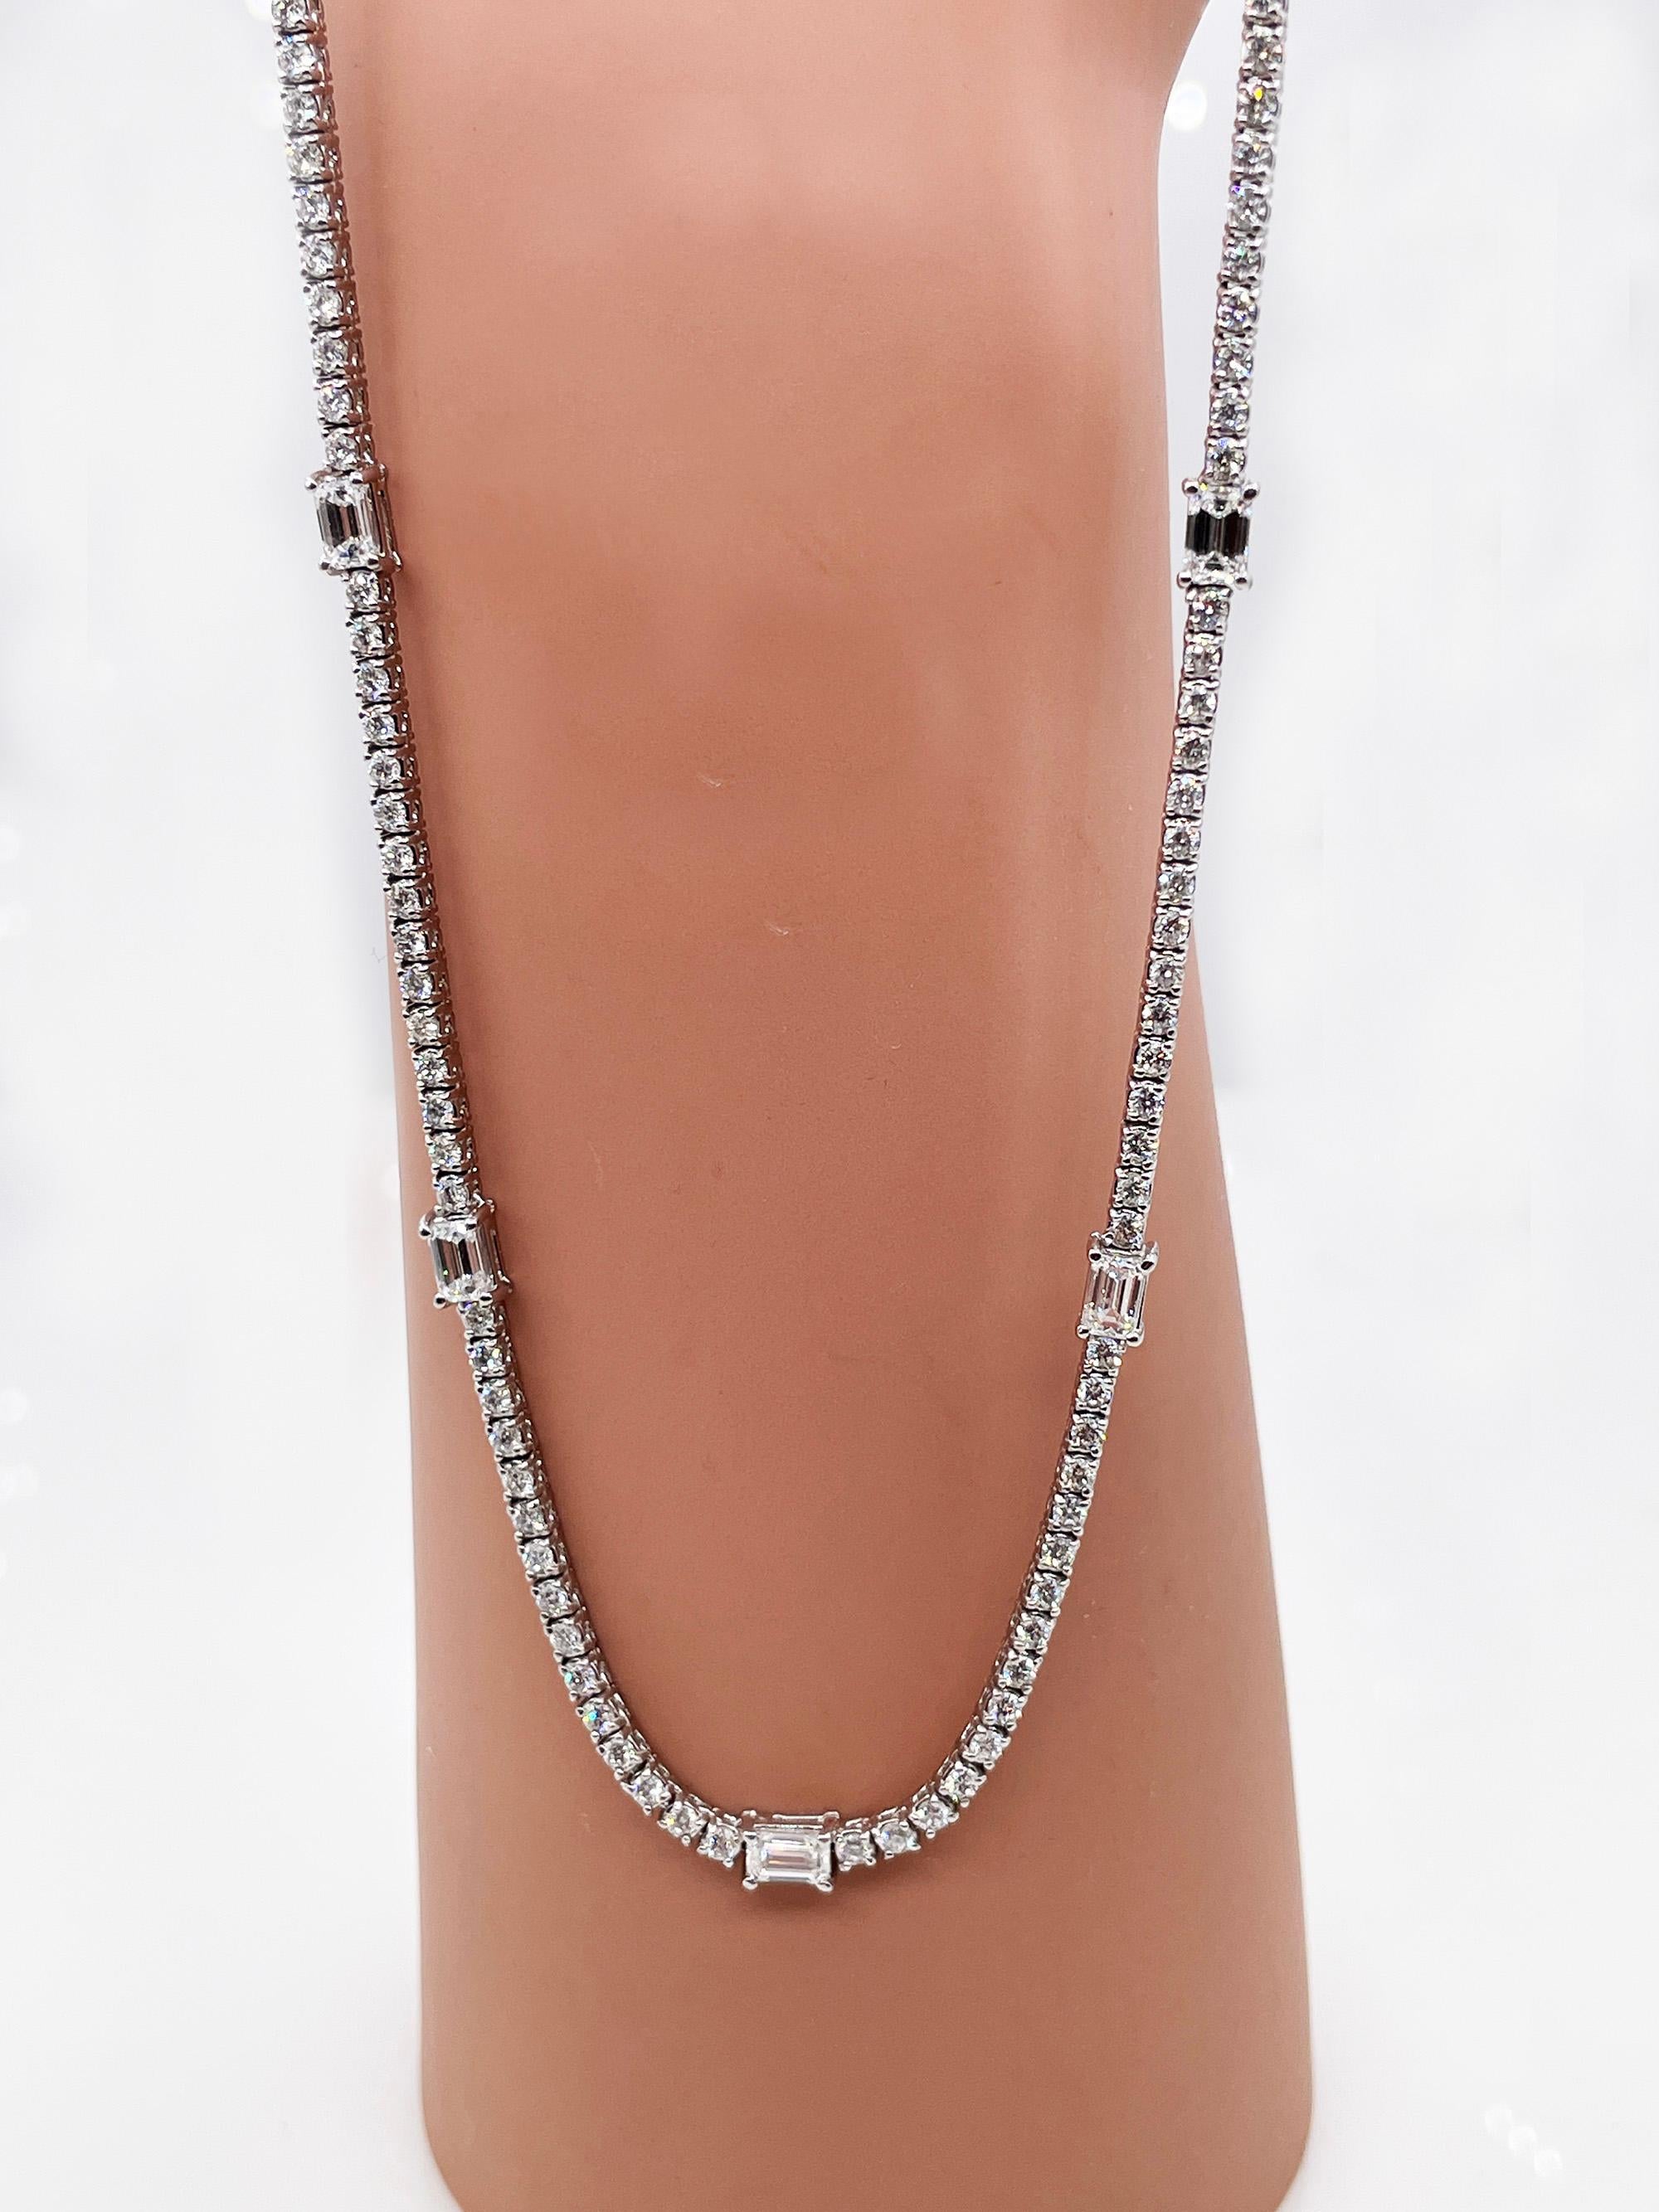 An Amazing and very Rare Estate Diamond Handmade 14k White gold (stamped) Tennis Necklace with over 166 Round Brilliant Diamonds in G color, VS-SI clarity overall; estimated total weight of the diamonds is 5.48ctw and 5 Emerald cut diamonds in G